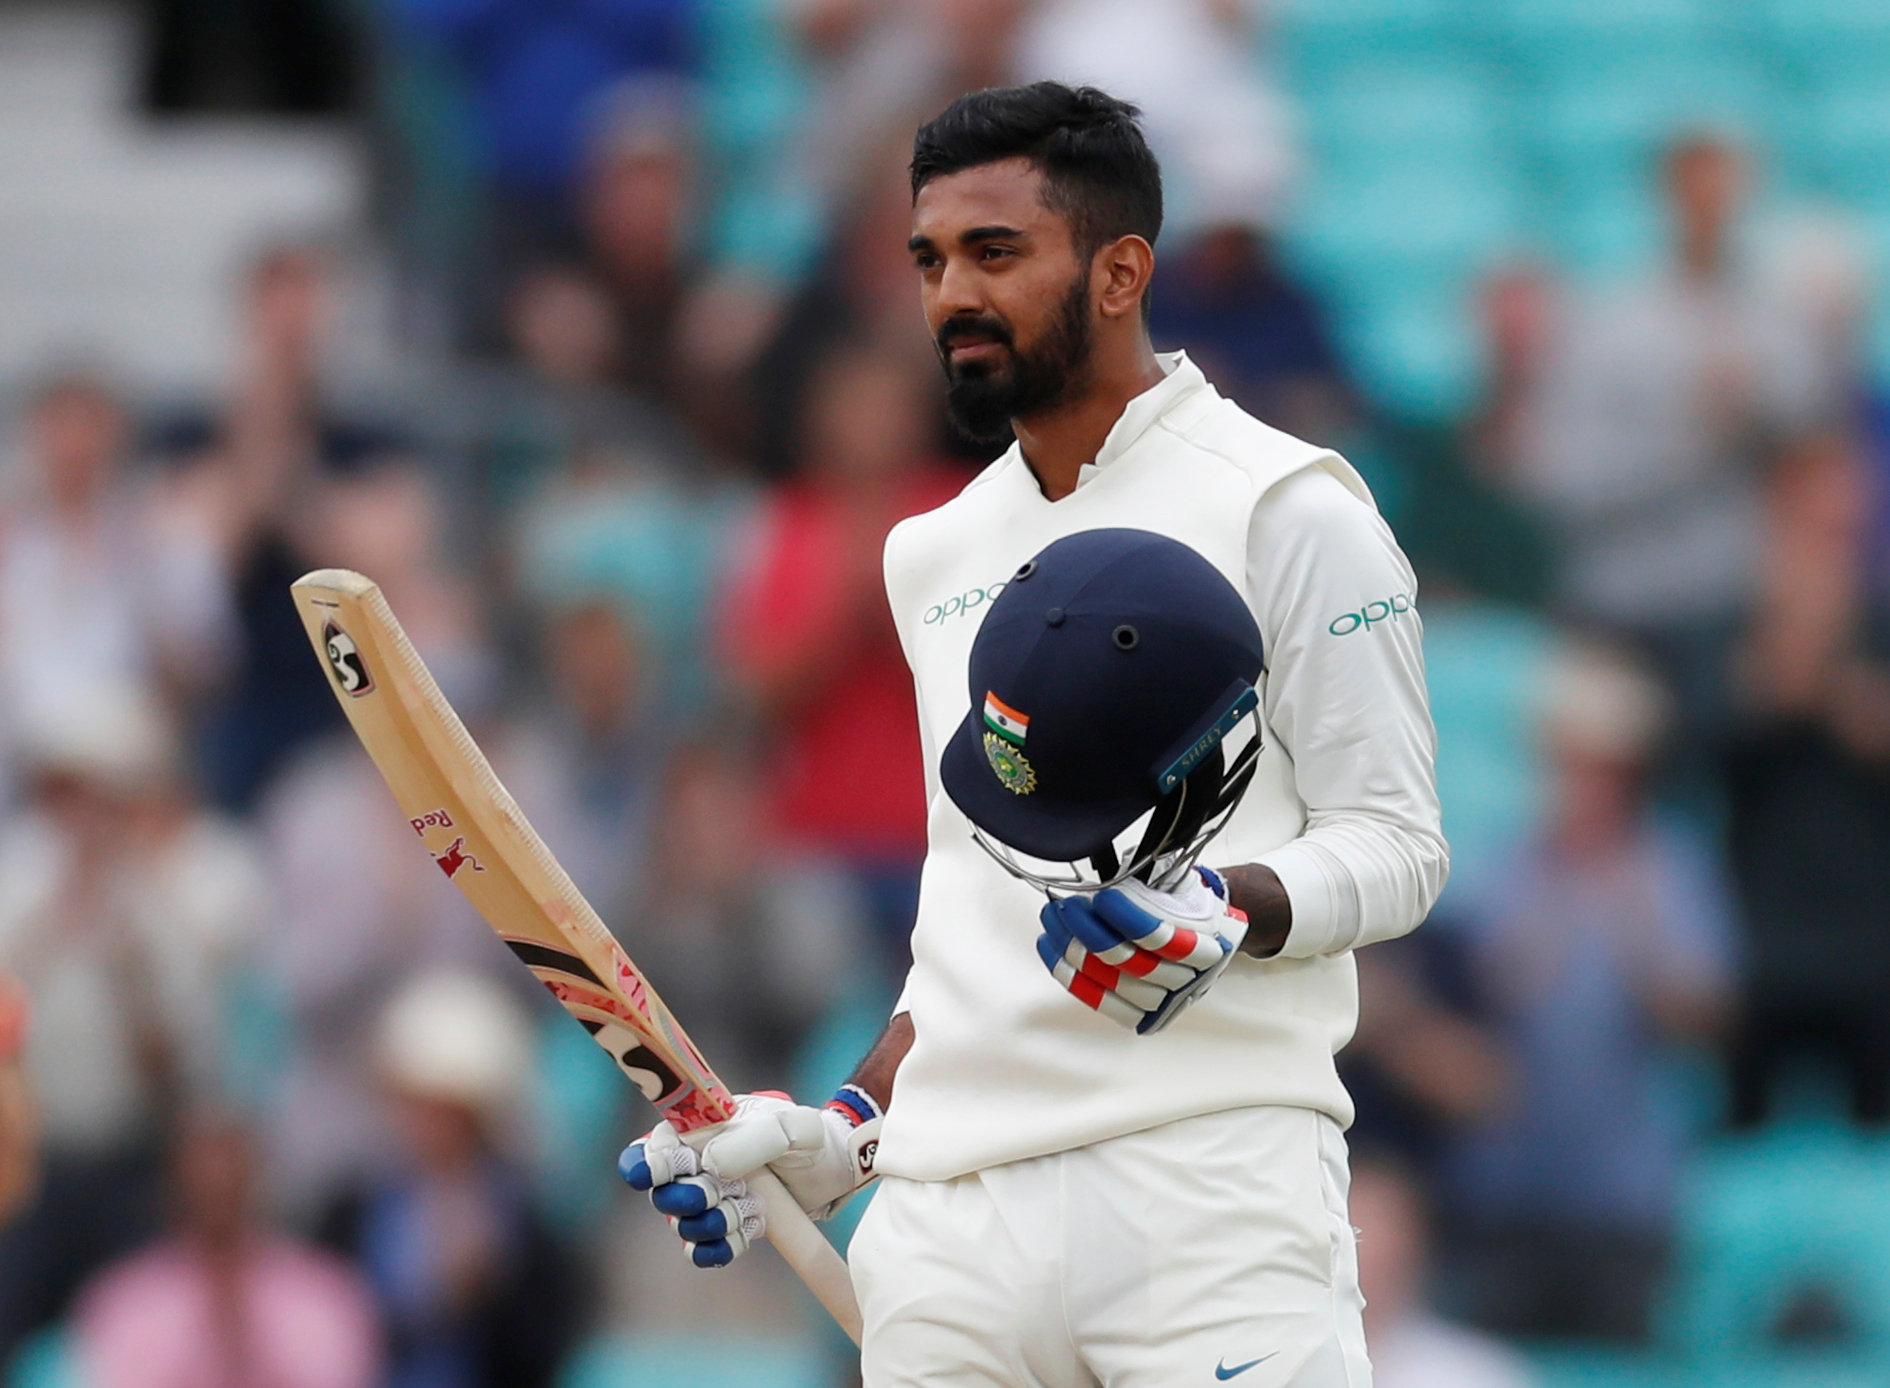 Cricket: Rahul and Pant defy England, give India a chance